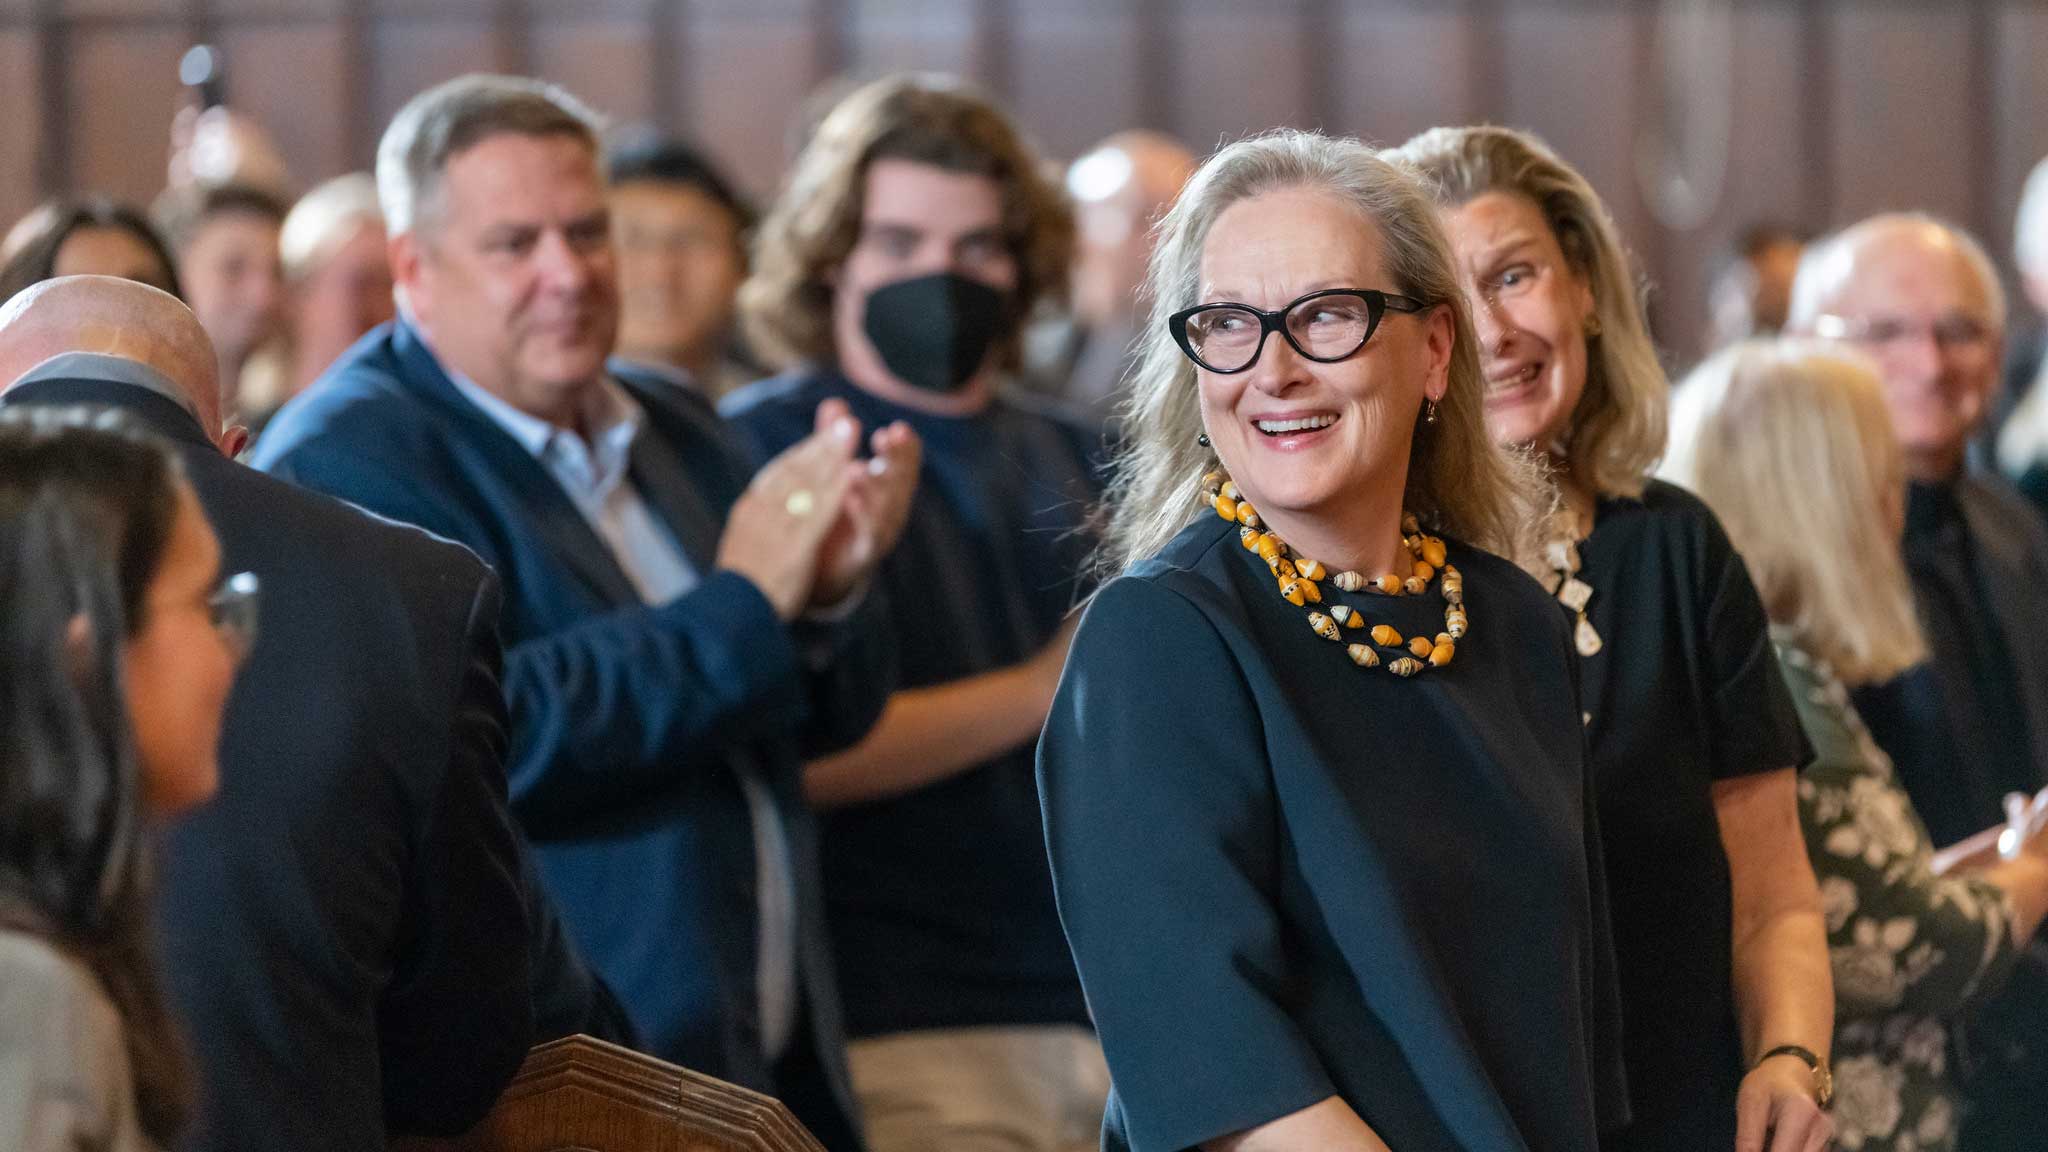 Meryl Streep standing in an audience while smiling and looking back